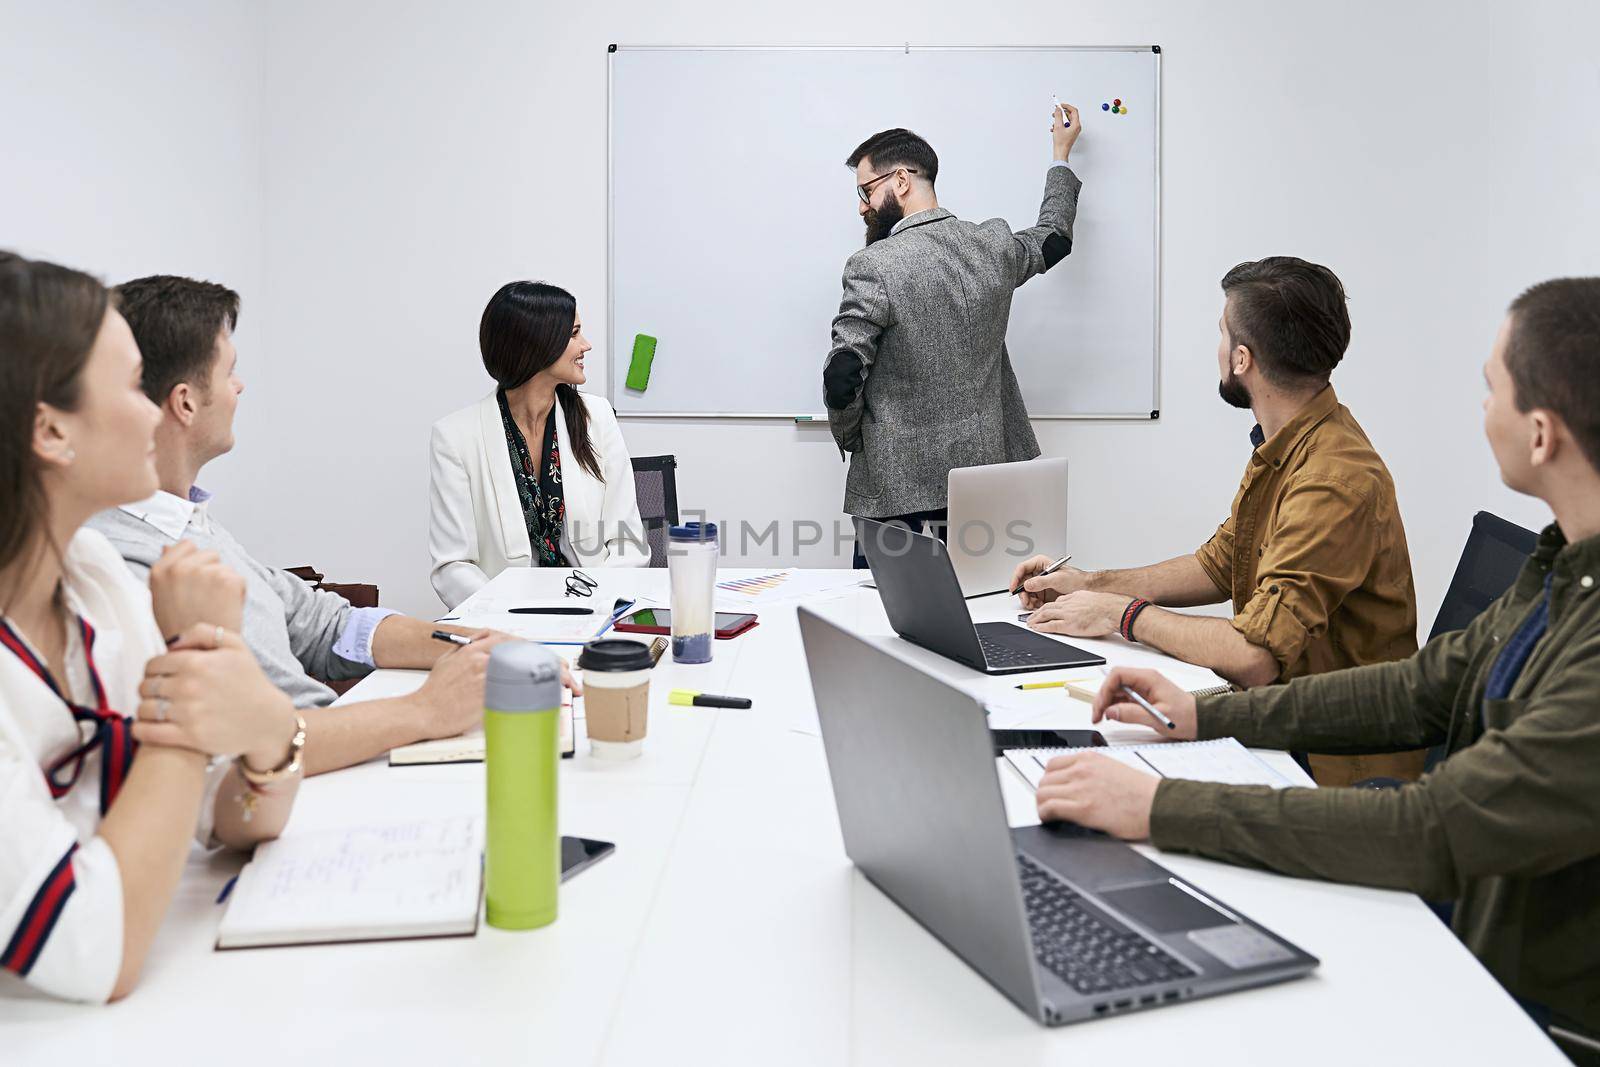 Male business coach speaker in suit give whiteboard presentation, speaker presenter consulting training persuading employees client group, mentor leader explain strategy at team meeting workshop by berezko